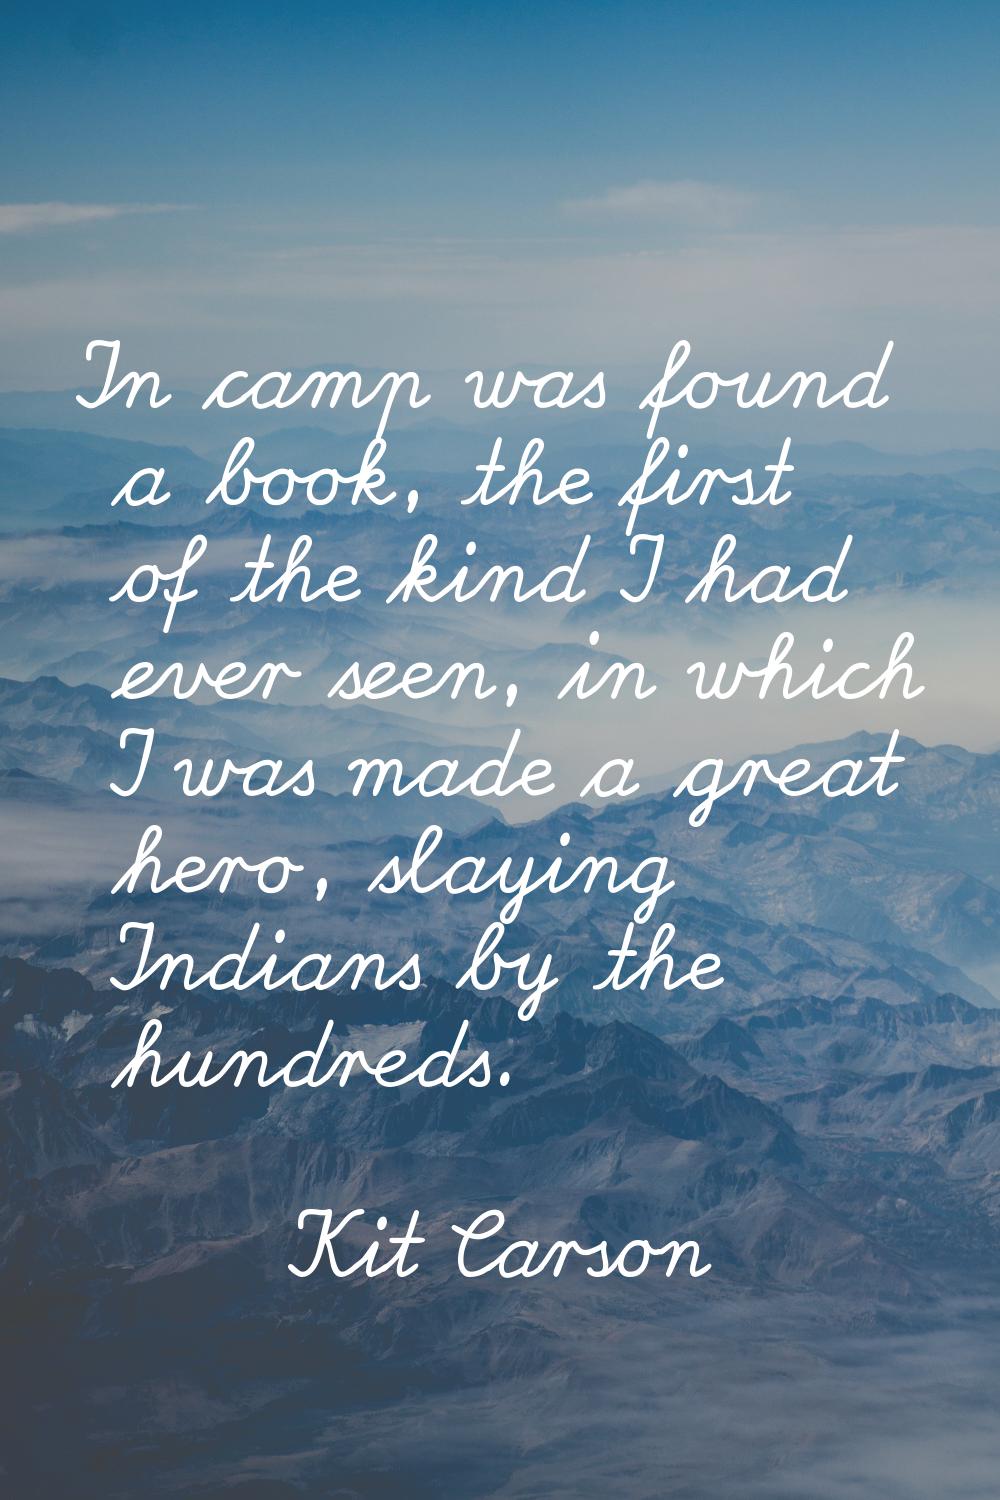 In camp was found a book, the first of the kind I had ever seen, in which I was made a great hero, 